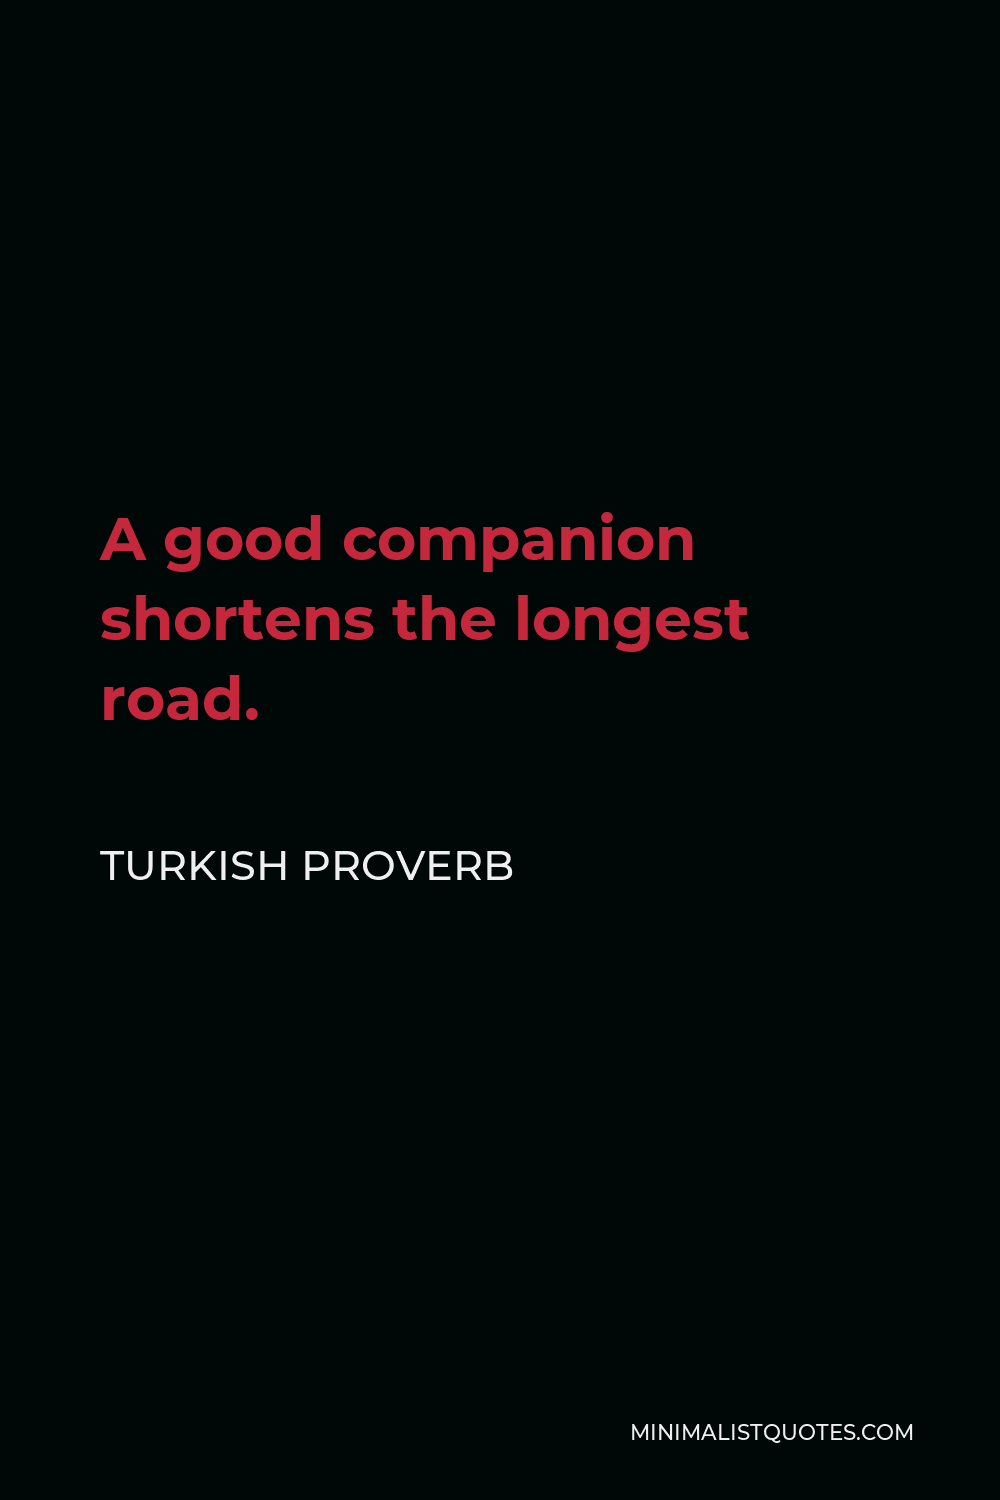 Turkish Proverb Quote - A good companion shortens the longest road.